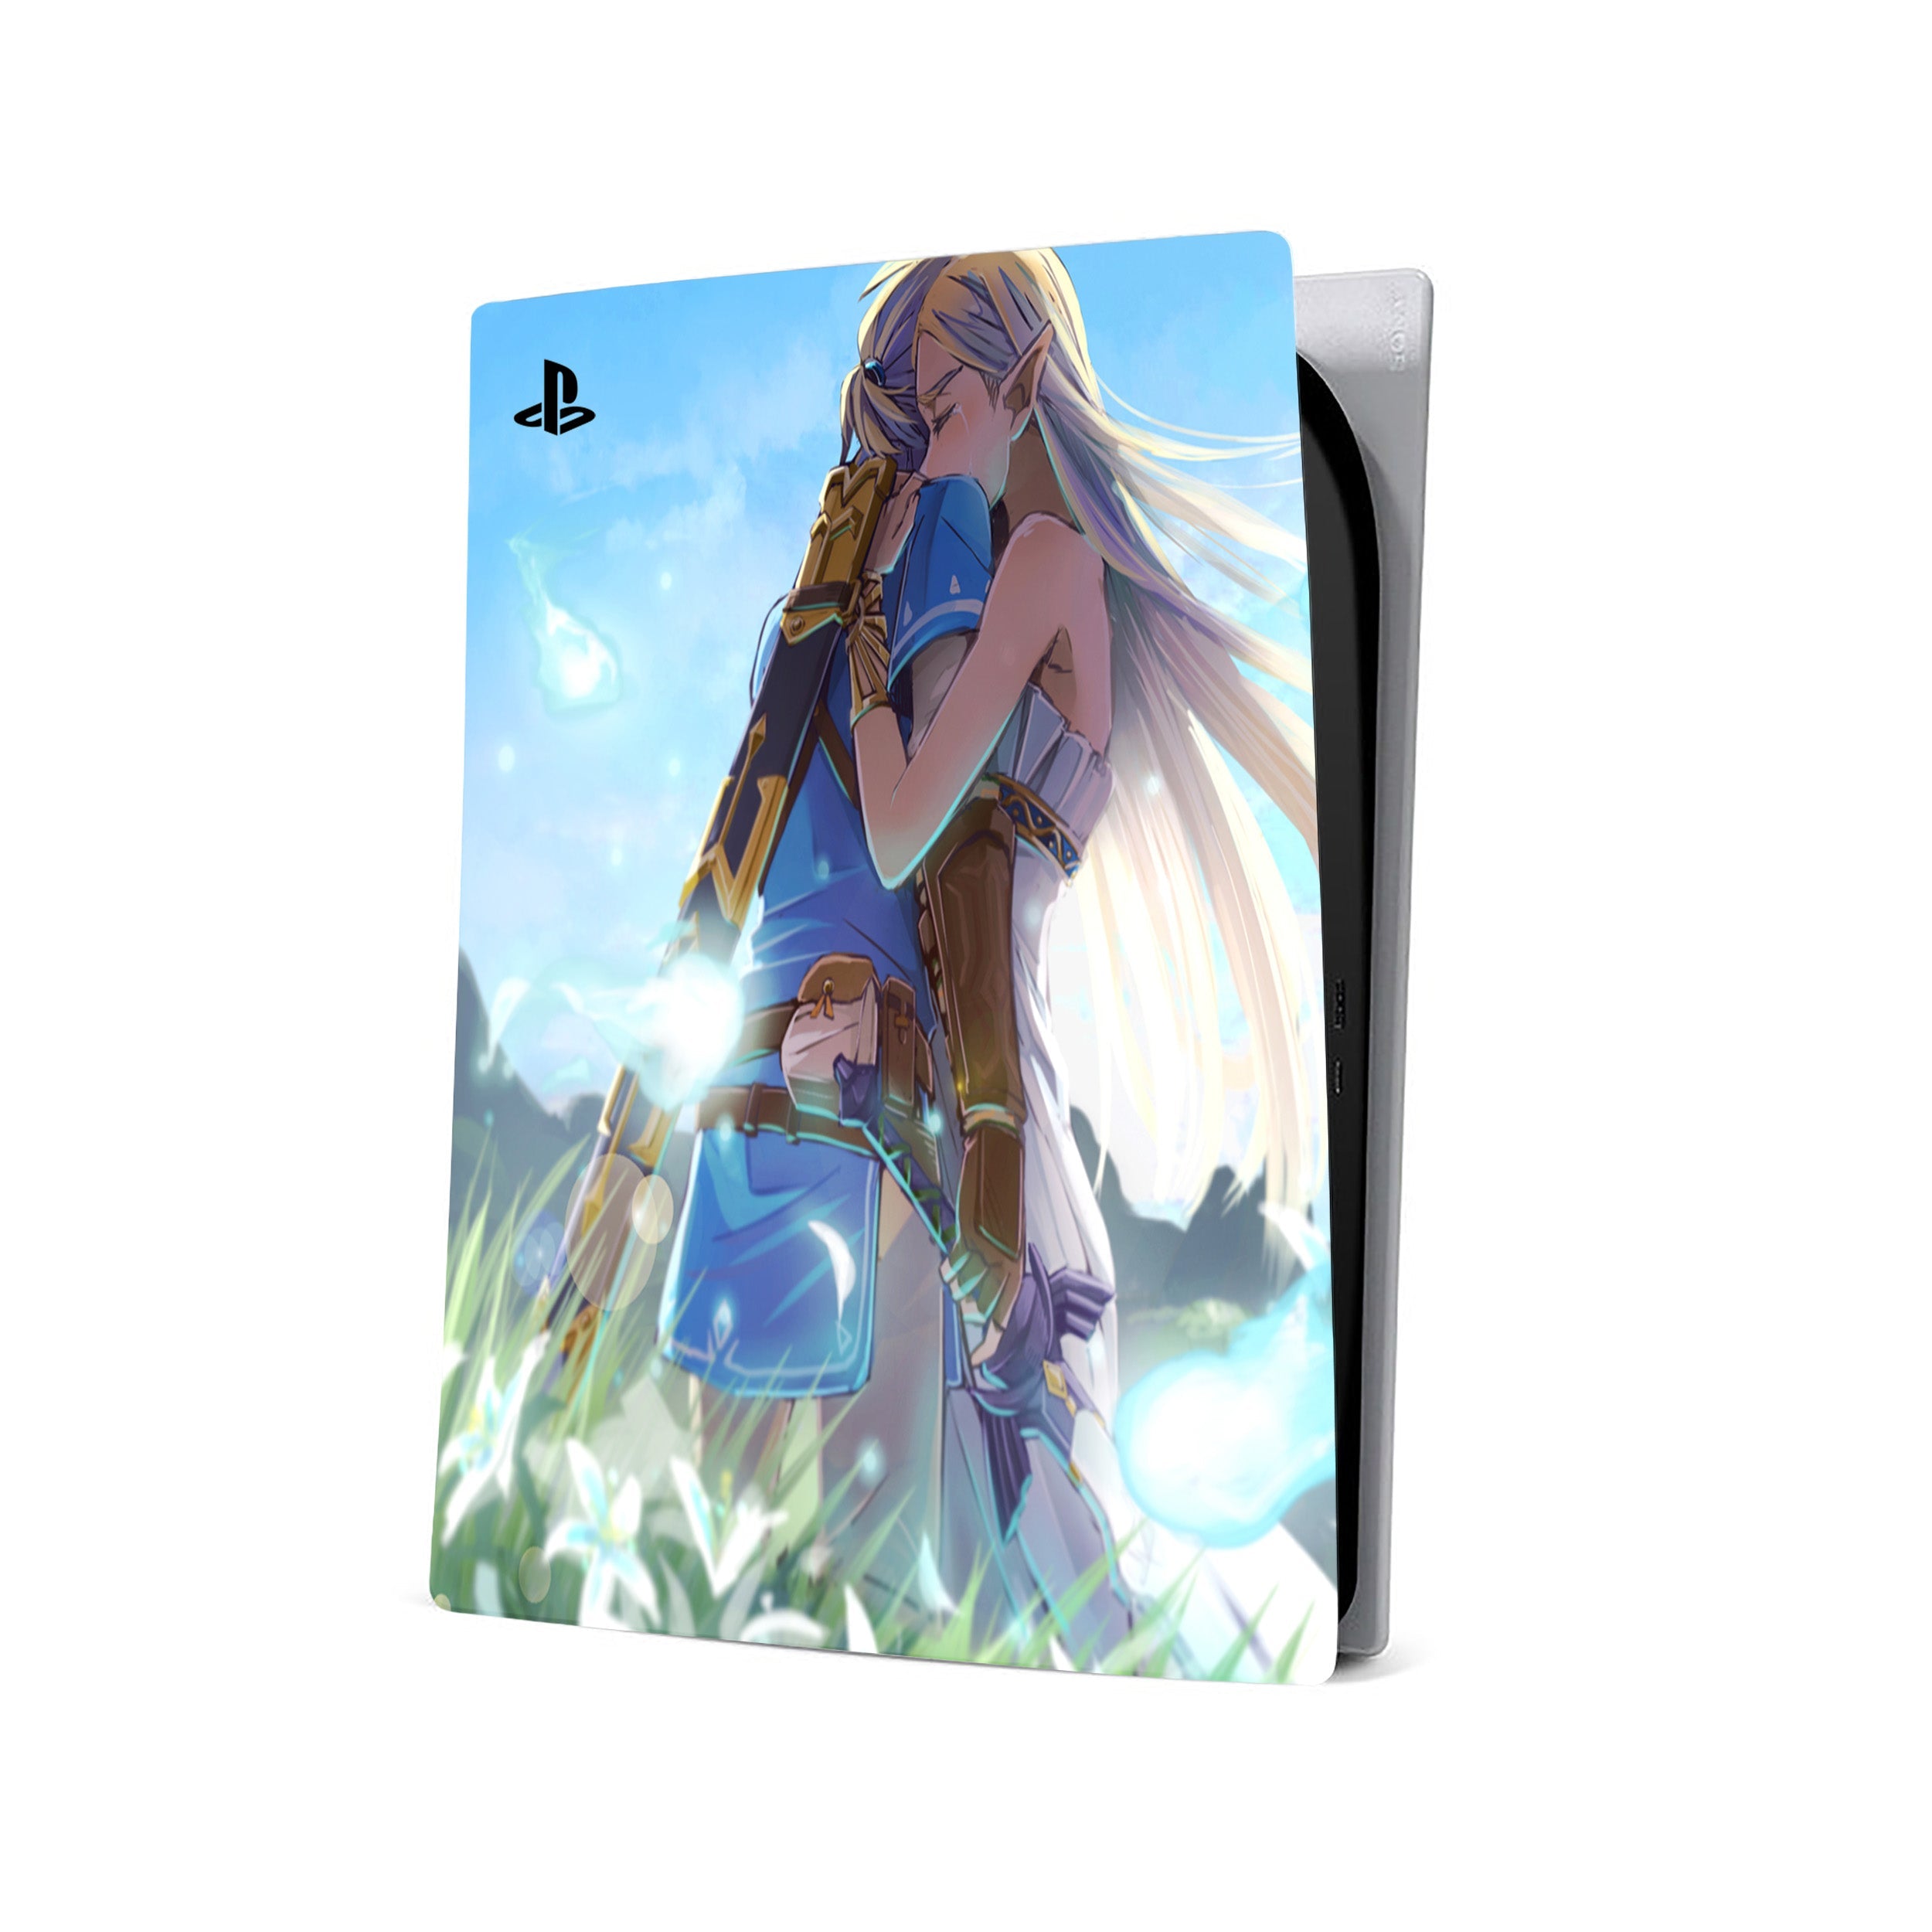 A video game skin featuring a Zelda design for the PS5.